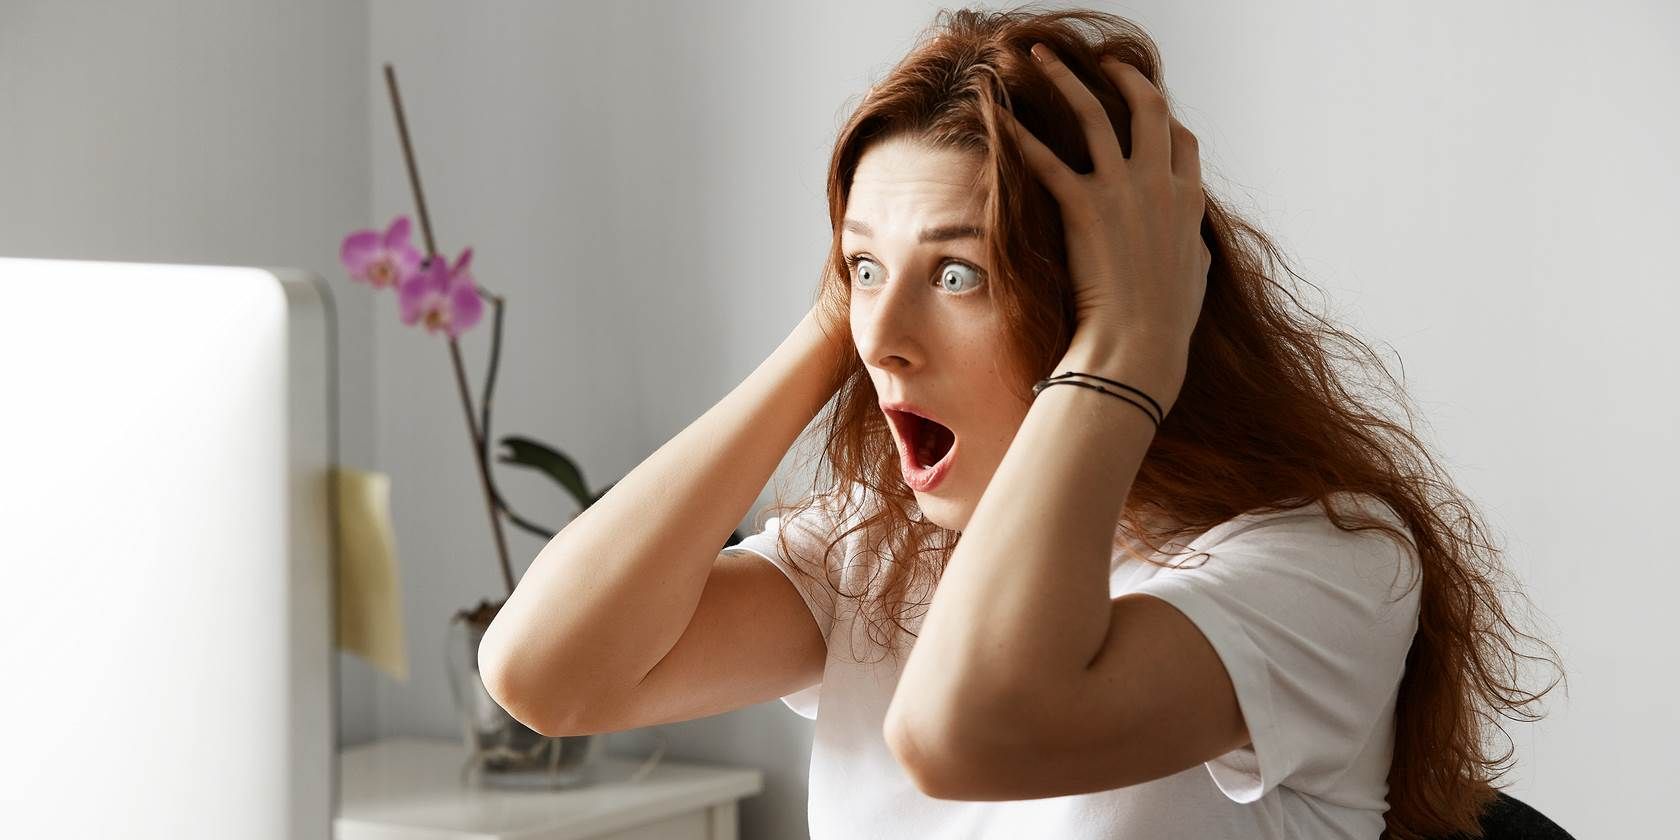 Woman grasping her head in shock while looking at a PC